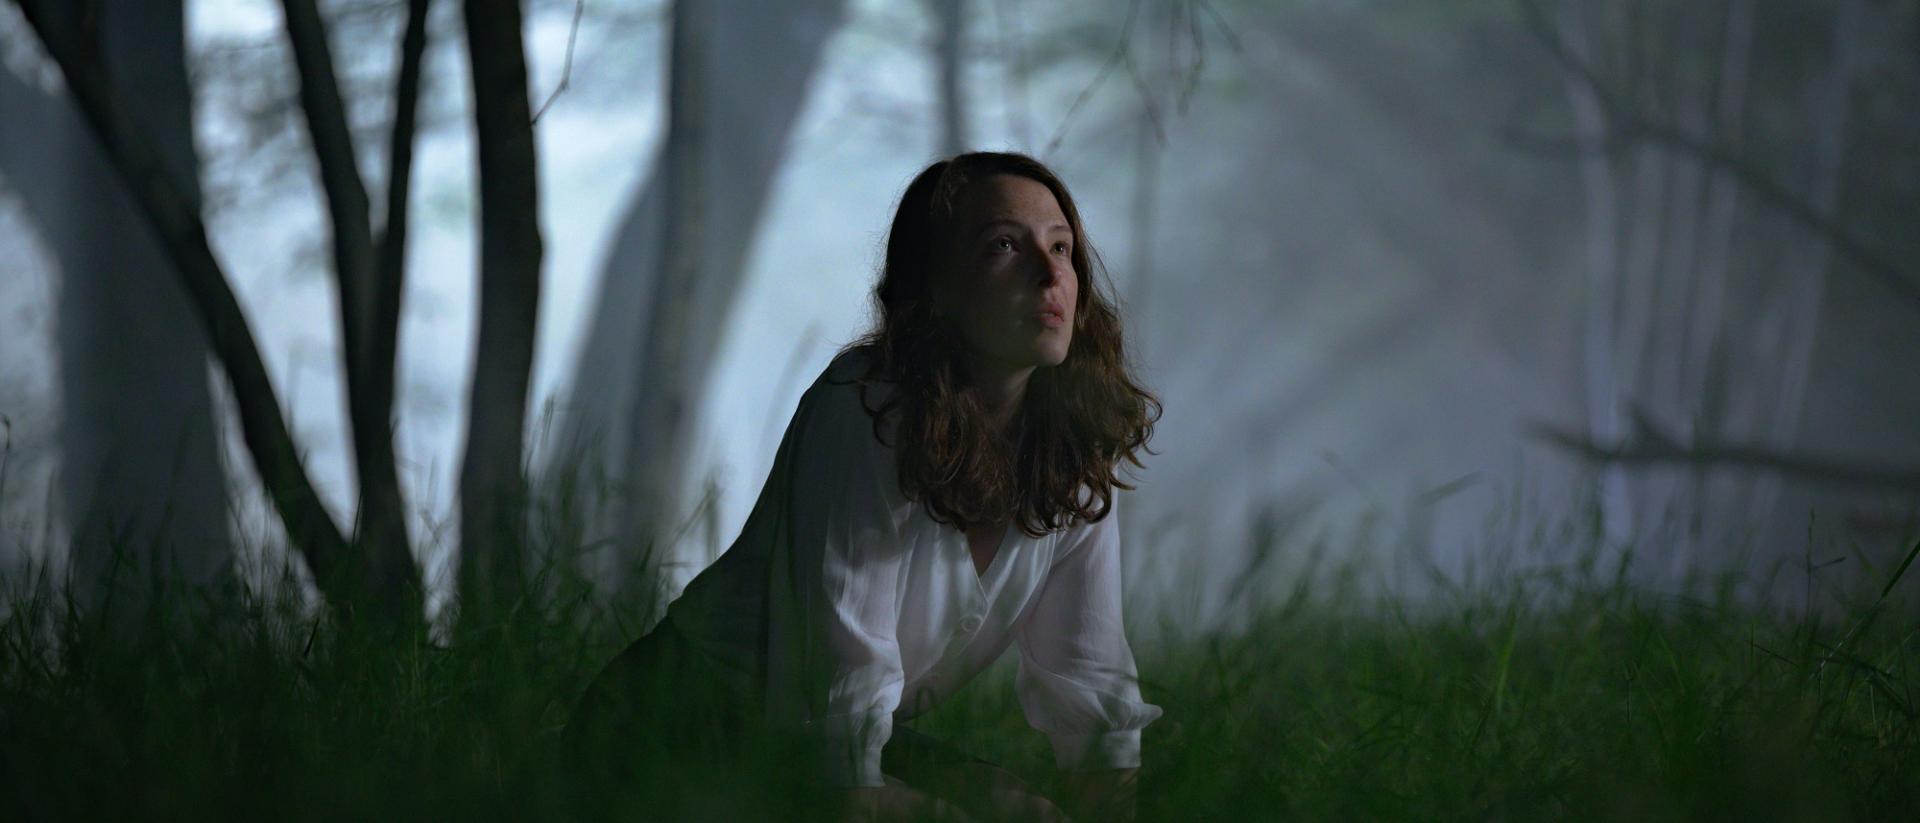 still from gwledd featuring annes elwy wearing a white blouse and standing in a forest